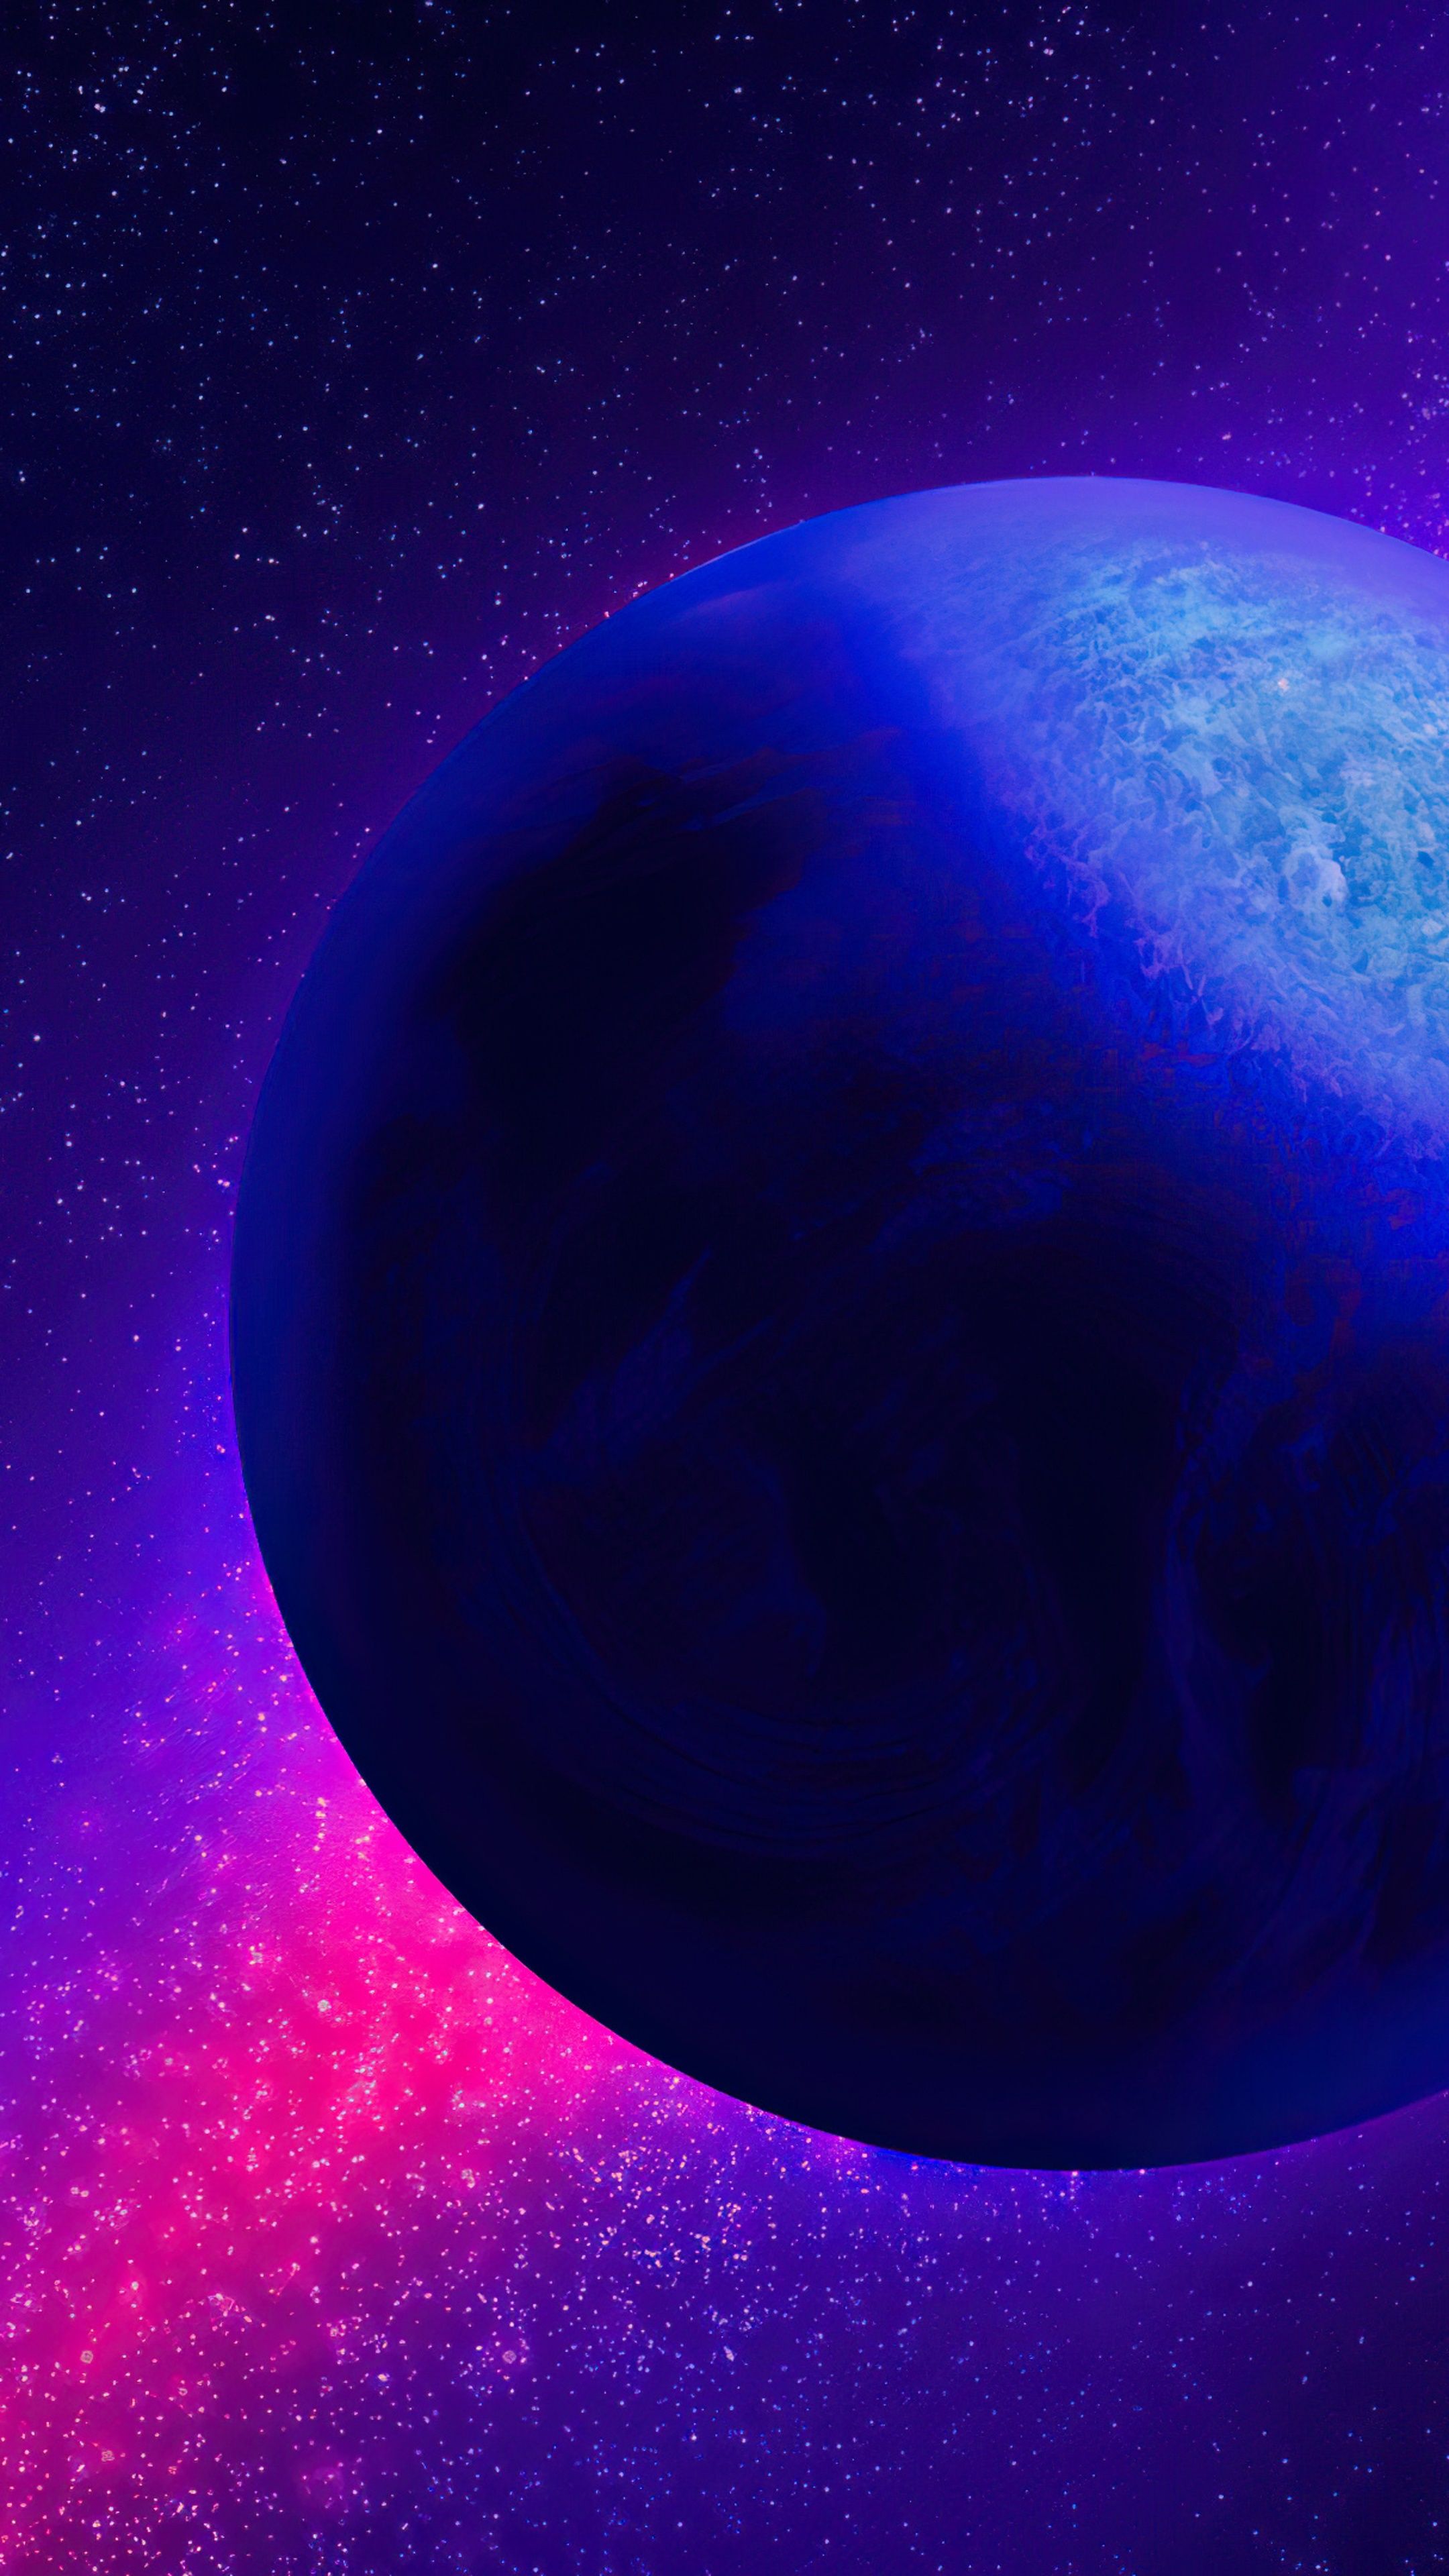 IPhone wallpaper of a planet in space with a purple and pink nebula. - Planet